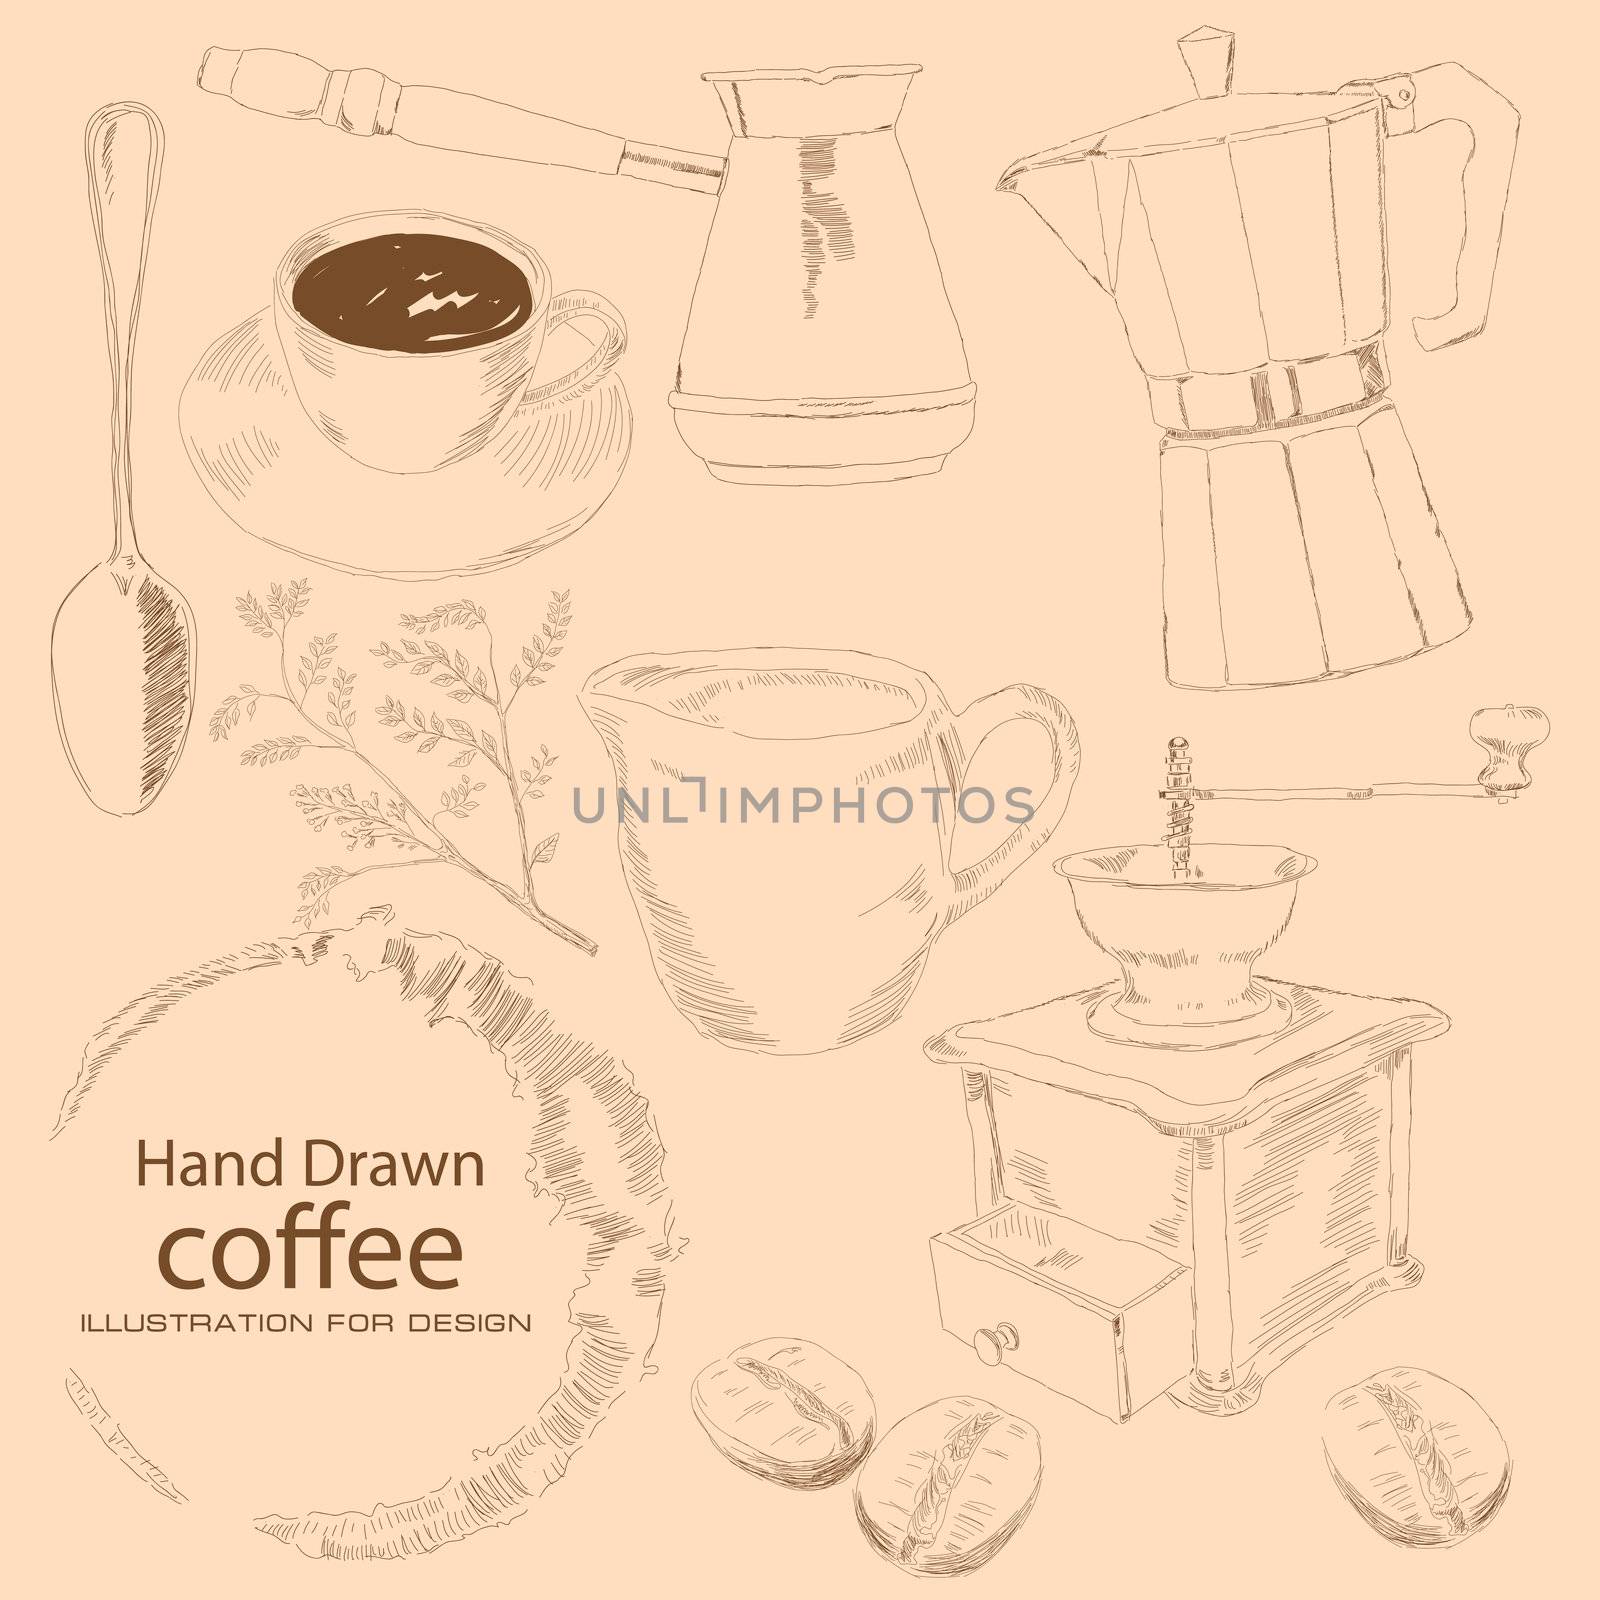 Subject coffee is drawn by hand, coffee cup, kofevrkoy, coffee zrnami, a branch of the coffee tree, hand grinder, a spoon, Turks prigtovleniya to drink.